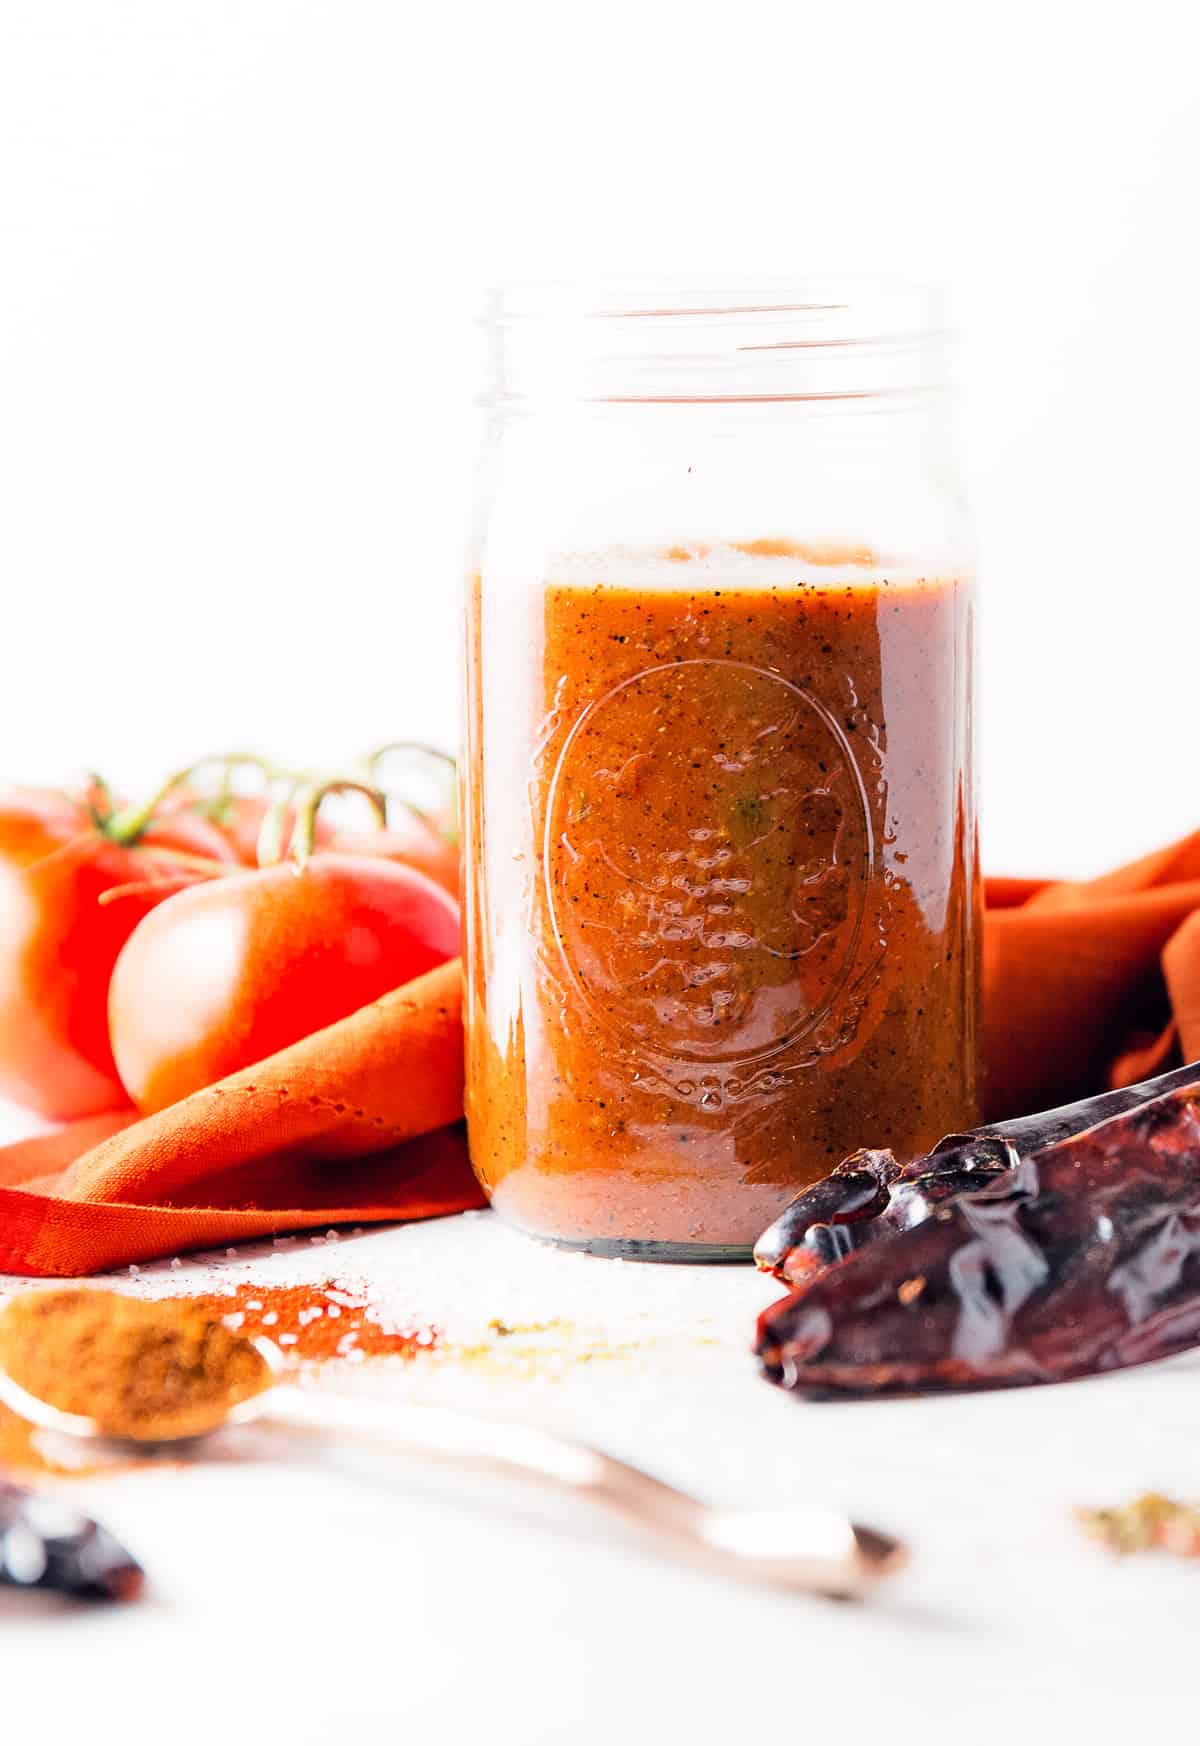 enchilada sauce, enchilada, enchiladas, sauce, tortillas, recipe, enchilada sauce recipe, sauce recipe, vegan, vegan recipe, whole food plant based recipe, whole food plant based, vegetarian, vegetarian recipe, gluten free, gluten free recipe, vegan dinner, vegan meals, vegetarian dinner, vegetarian meal, whole food plant based dinner, whole food plant based meal, gluten free dinner, gluten free meal, healthy, oil free, no oil, chili, chili powder, cumin, paprika, spices, tomato, quick dinner, fast dinner, entertaining, wfpb, dairy free, no dairy, traditional, Mexican, classic, delicious, the best, winter, fall, spring, summer, fast, easy, quick, simple, 30 minutes,